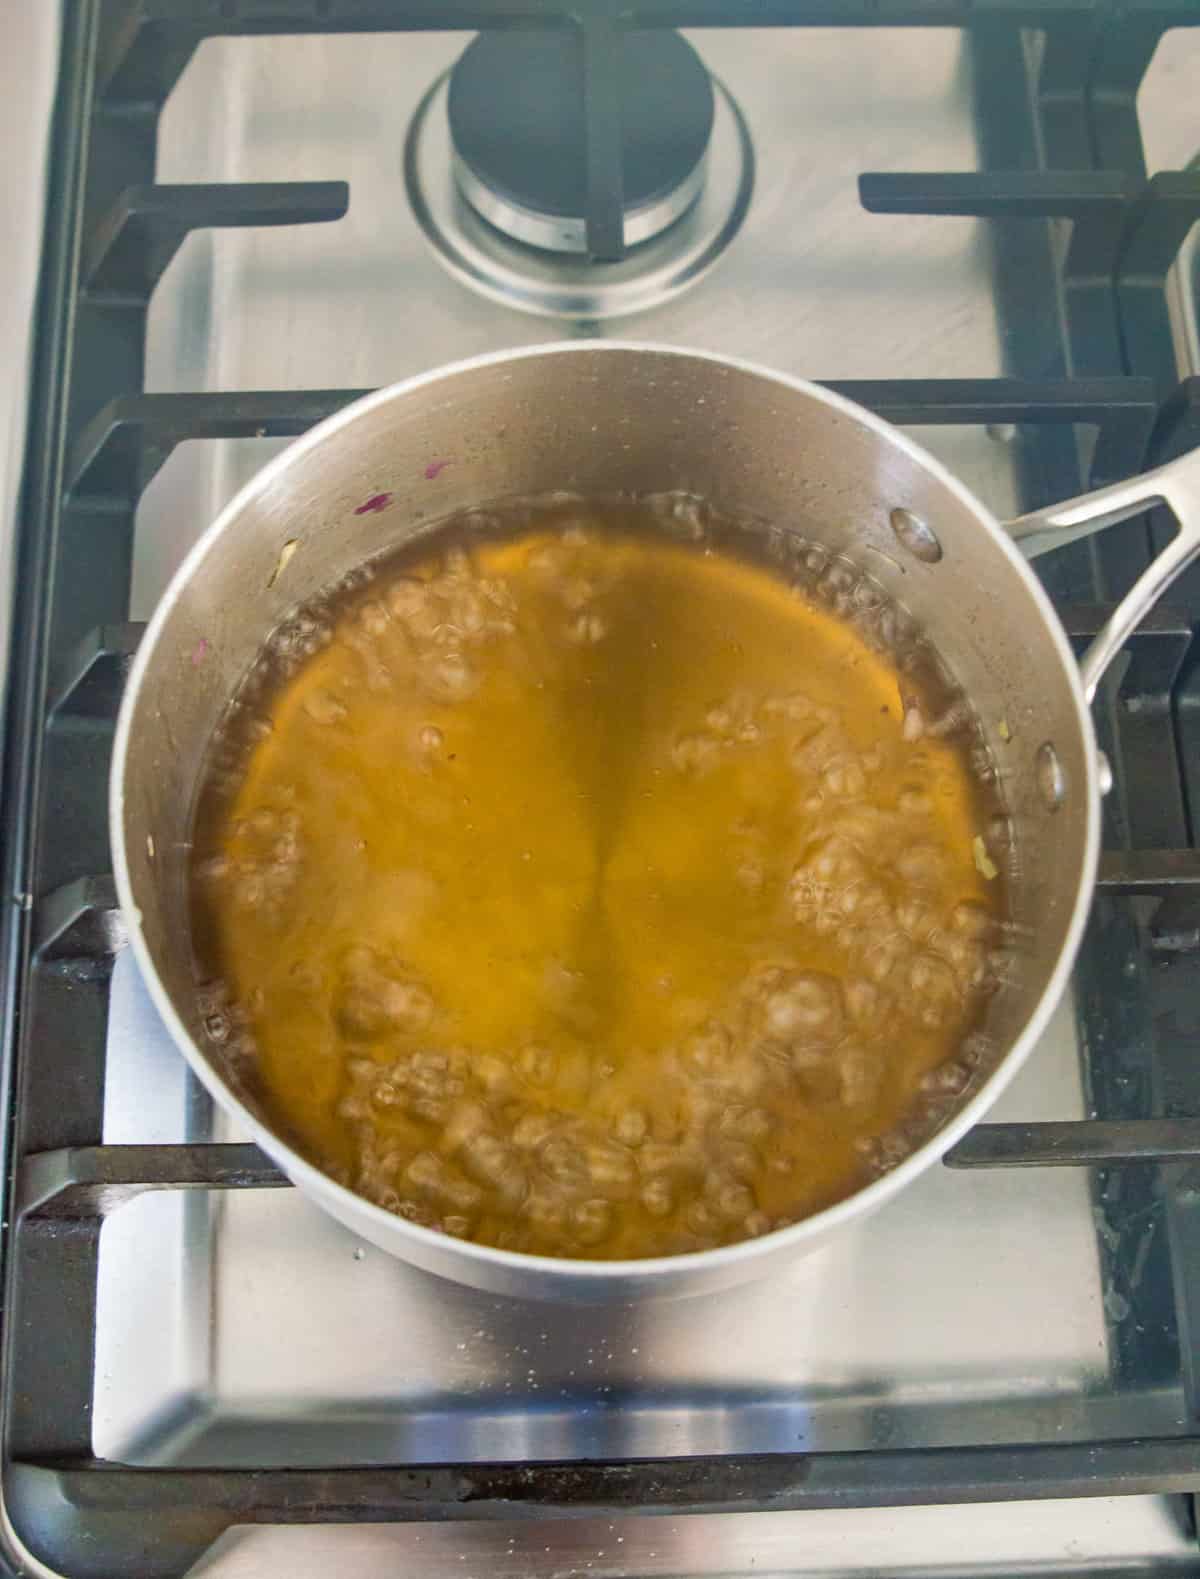 A pot filled with boiling sugar water on the stovetop.